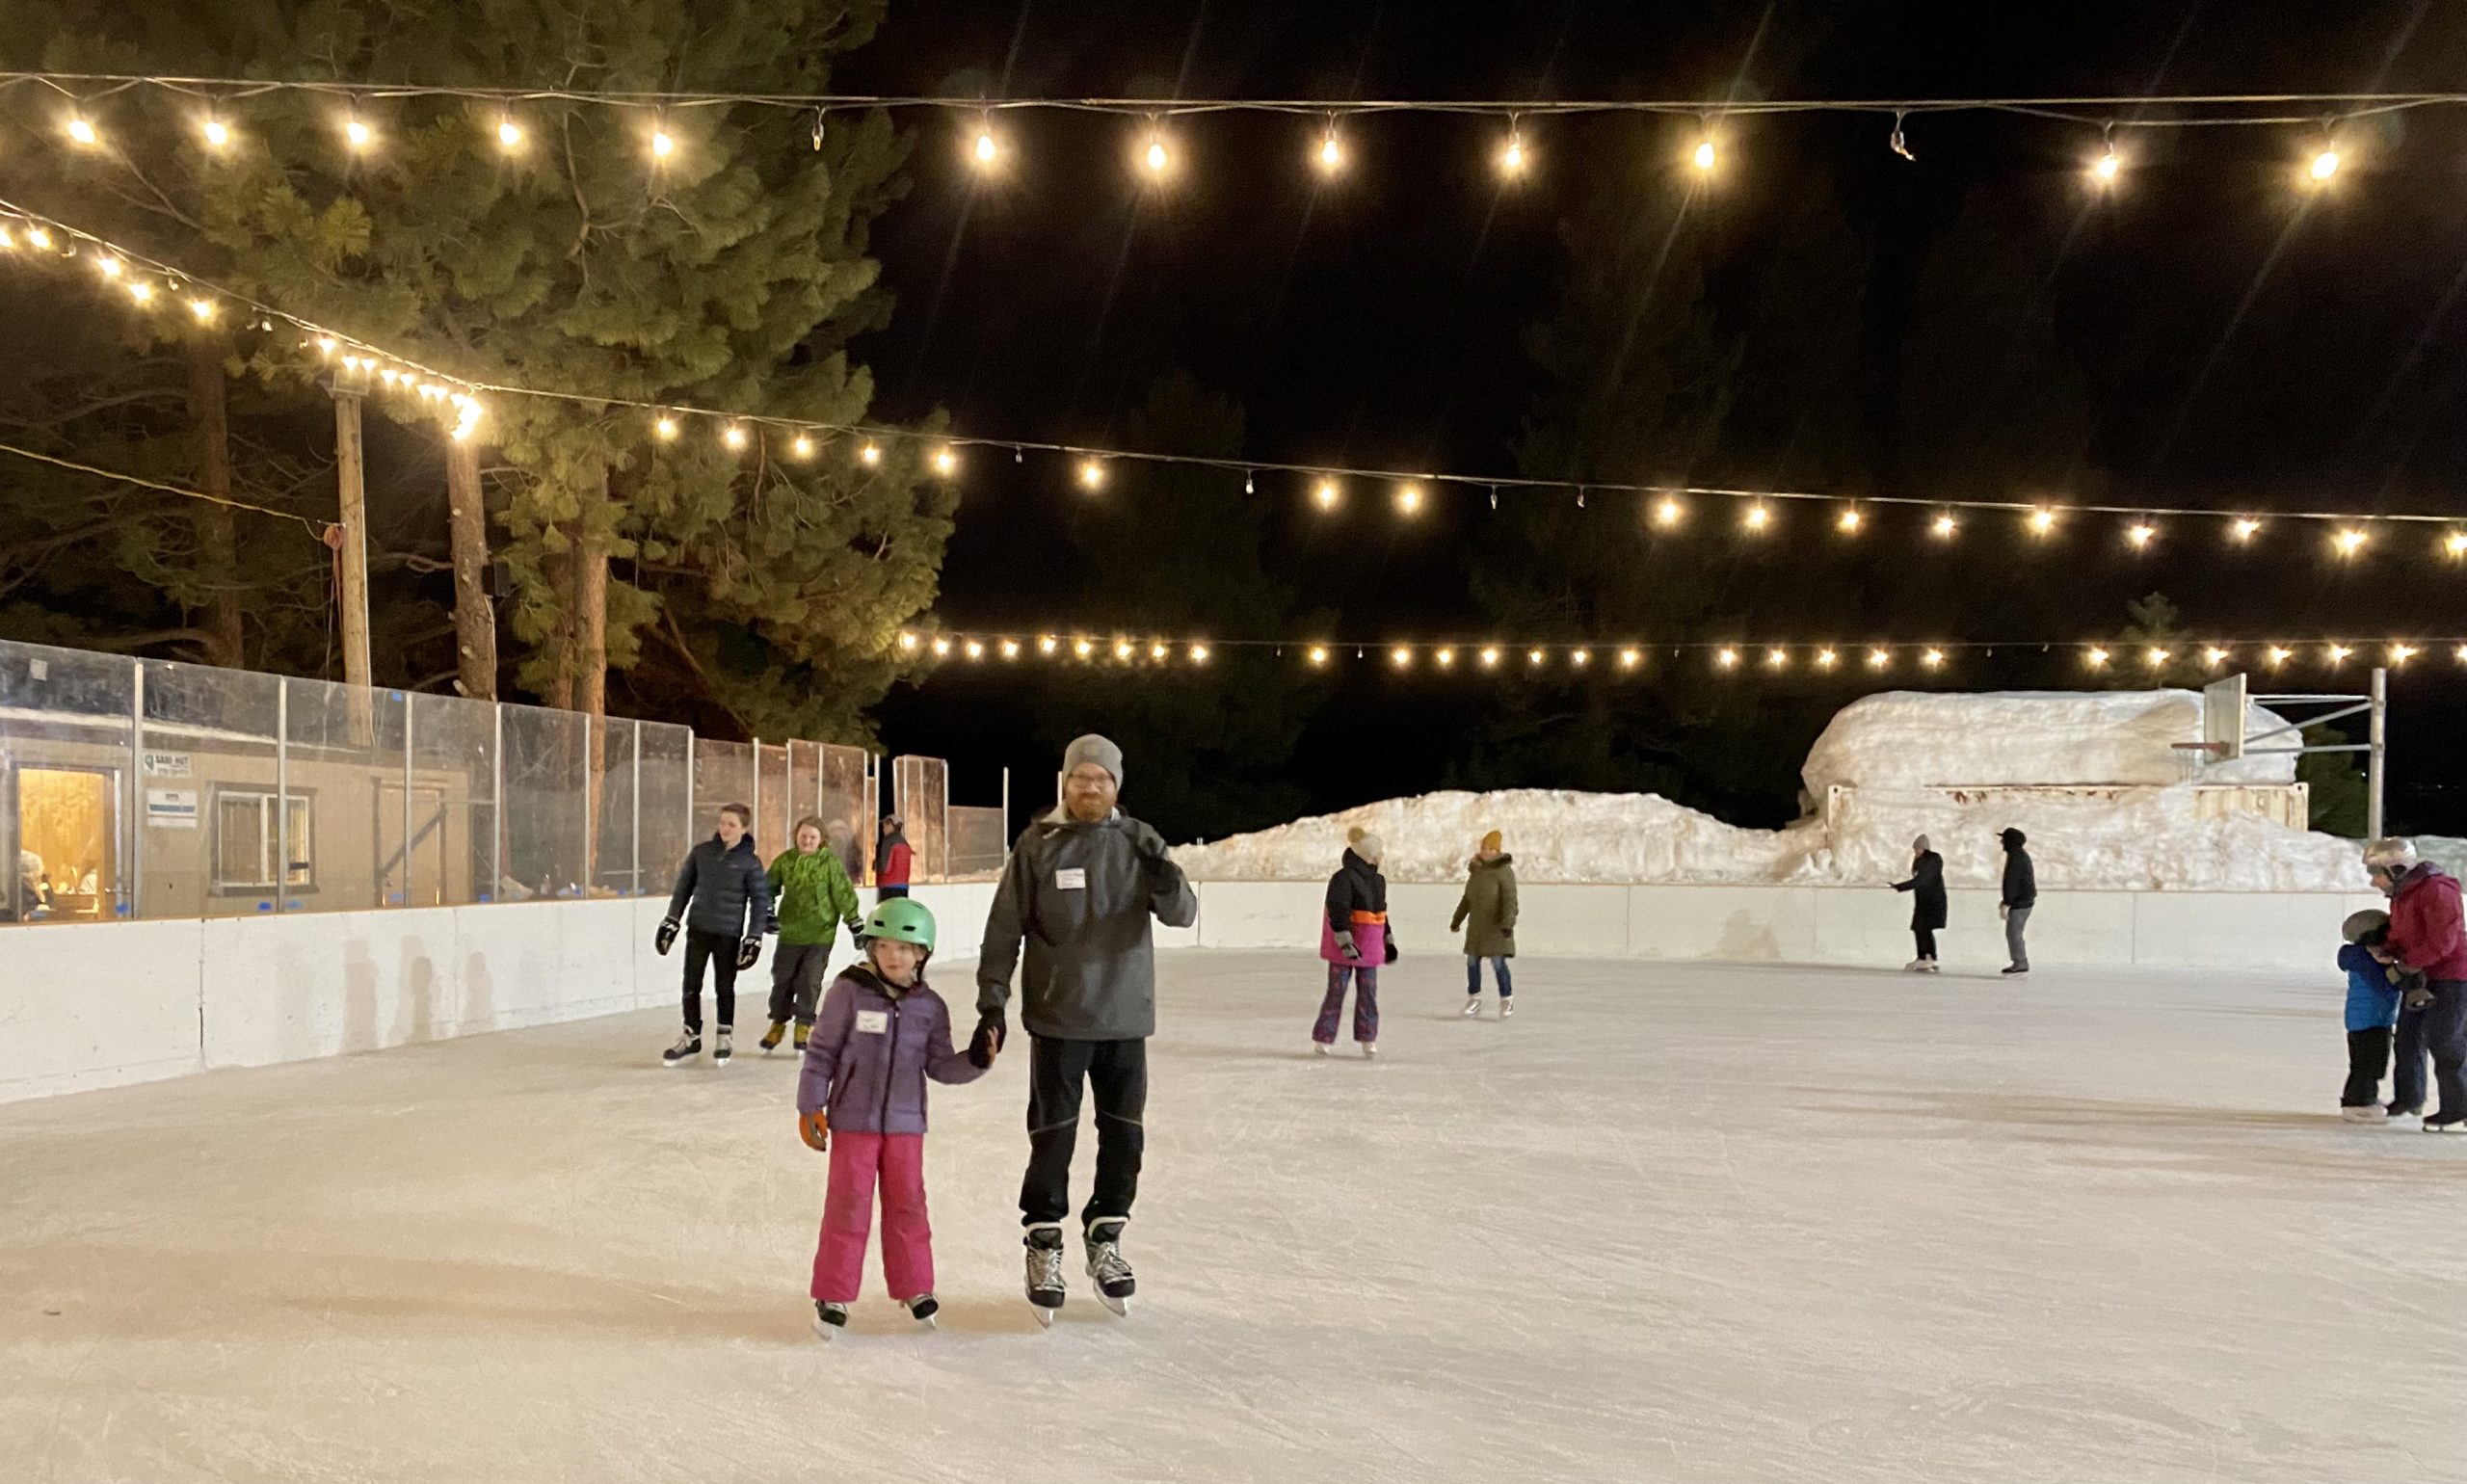 Wrap Up: BIG LIFE Connections Event at Truckee Ice Rink